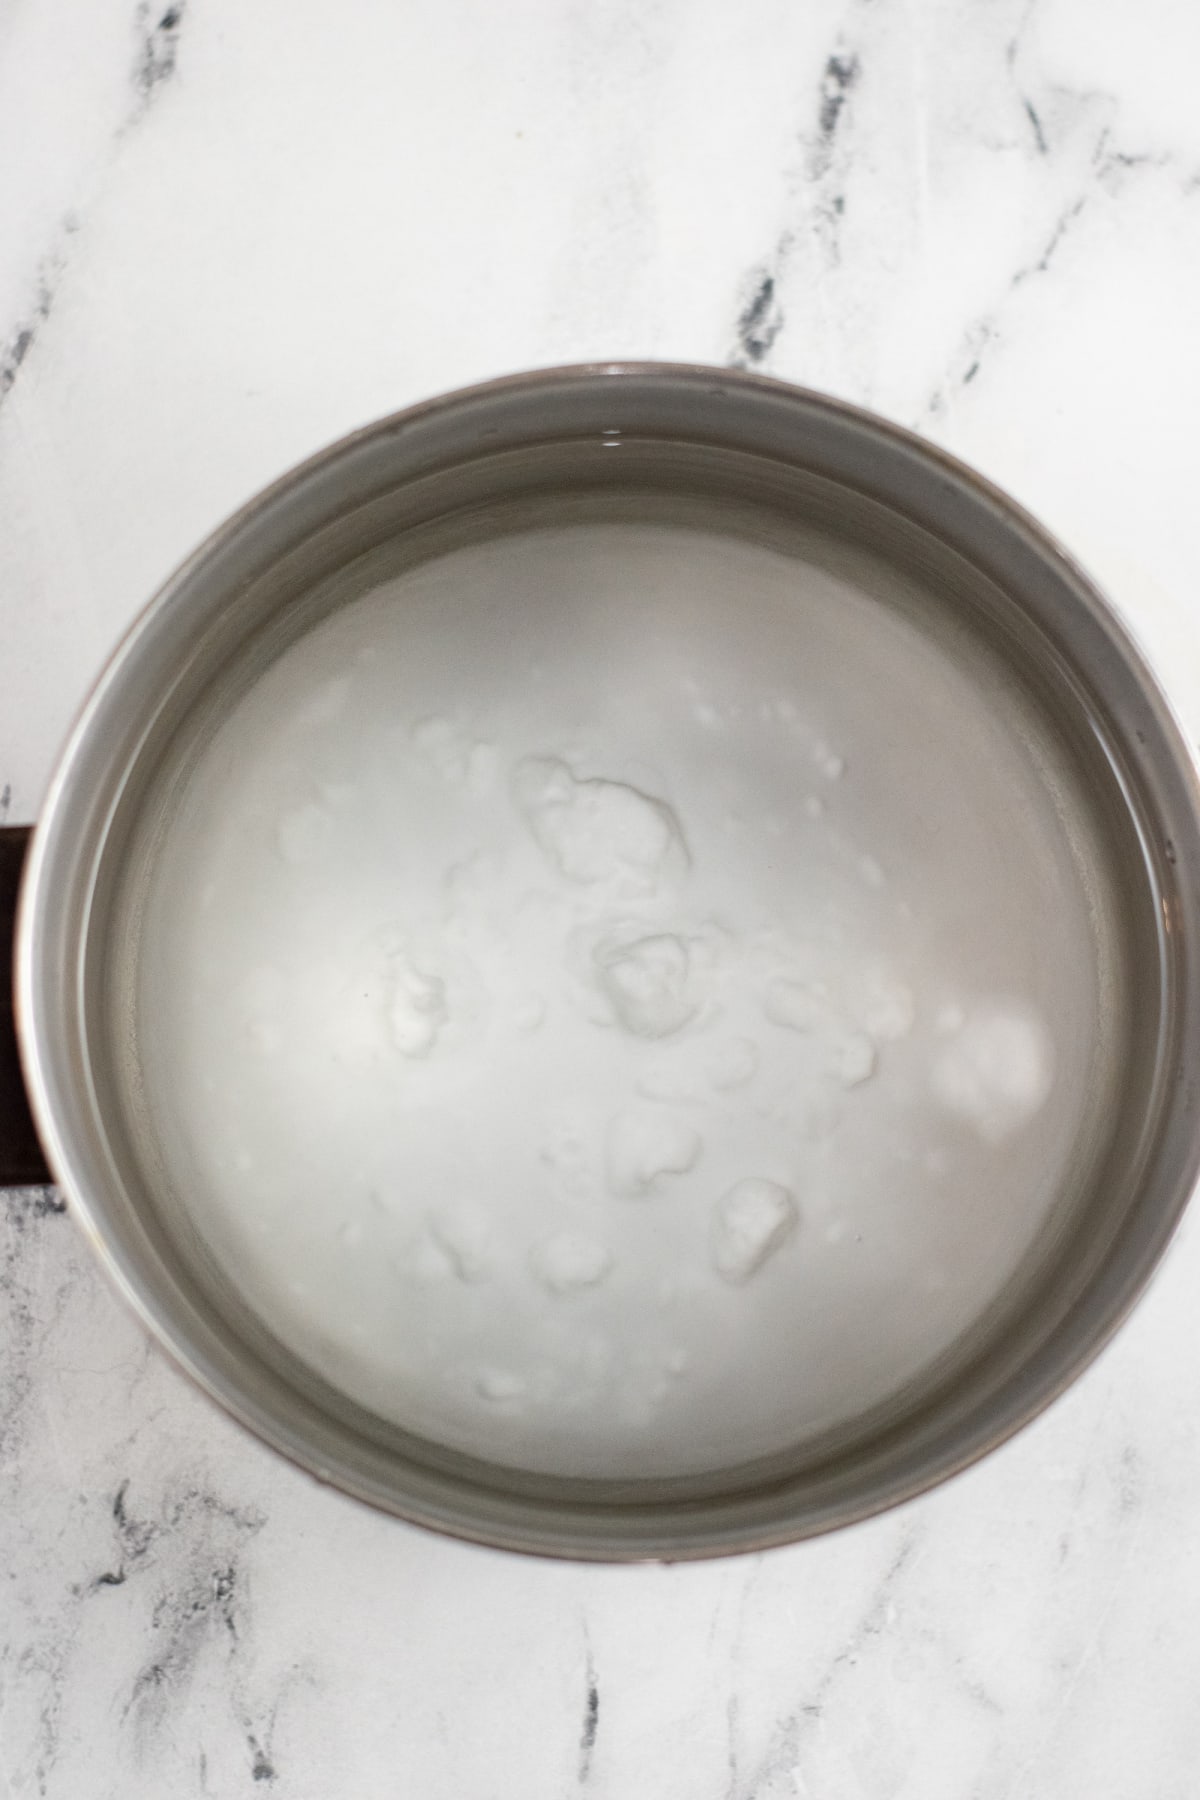 Large pot filled with water and baking soda